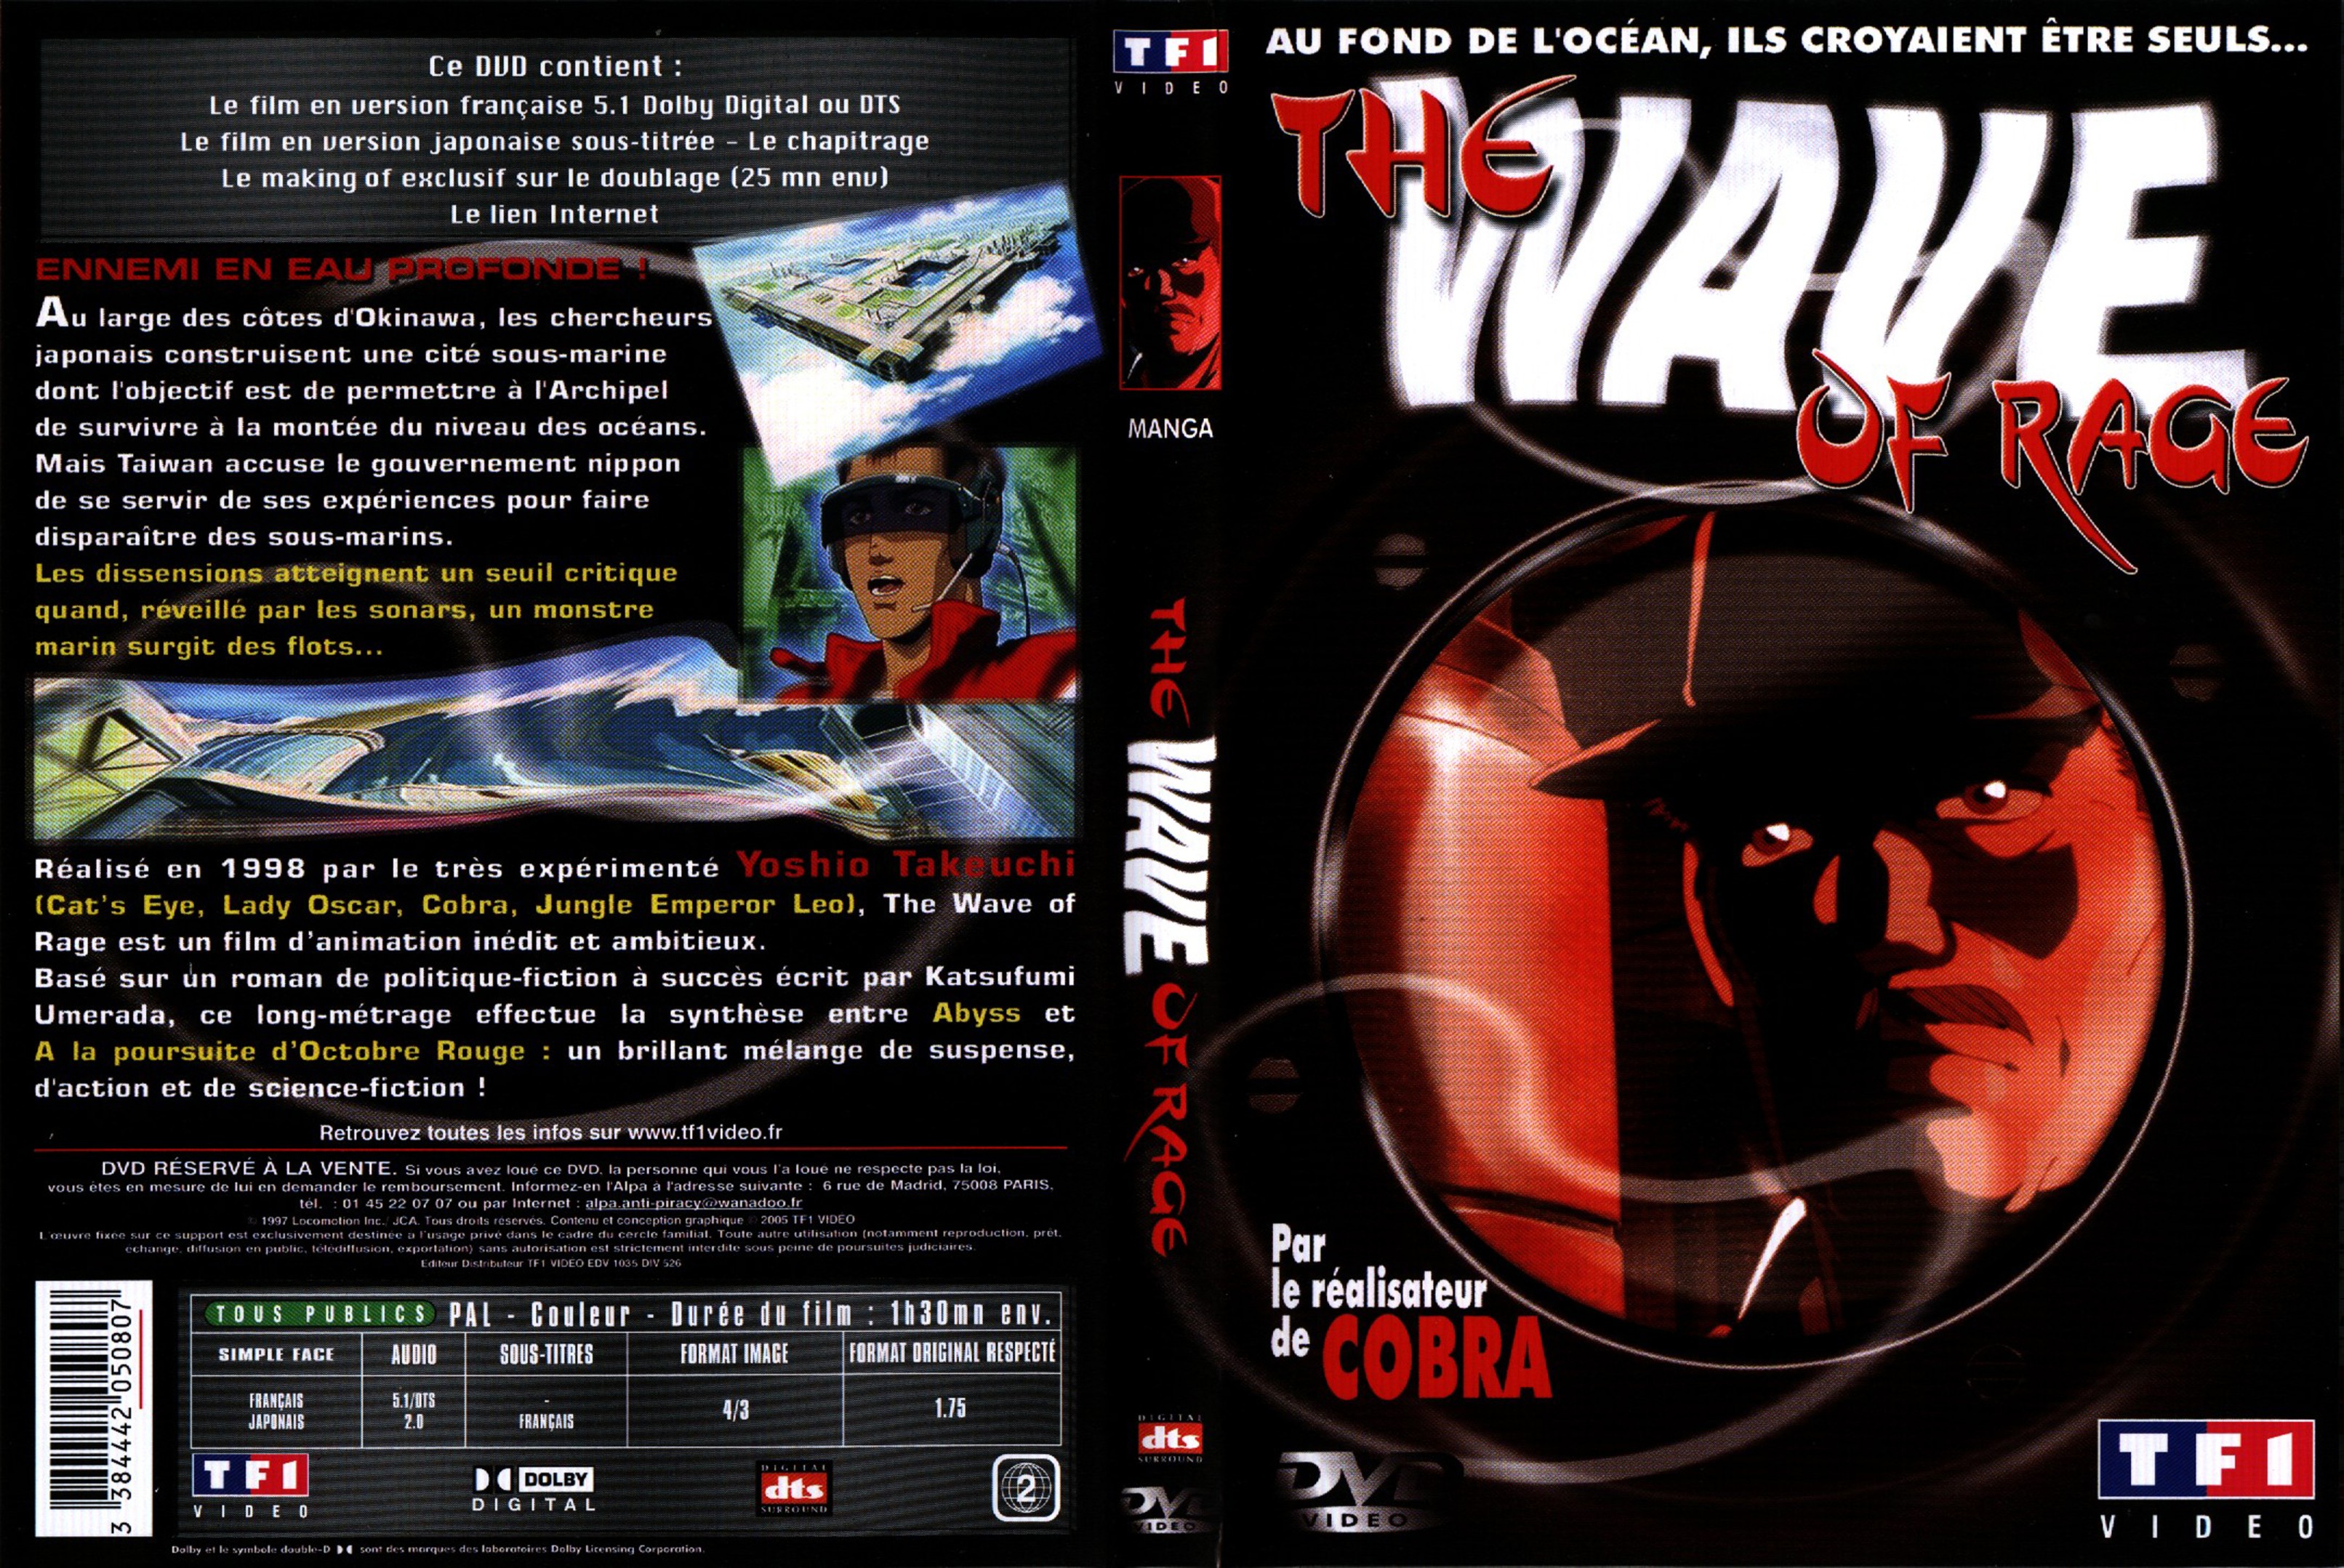 Jaquette DVD The wave of rage